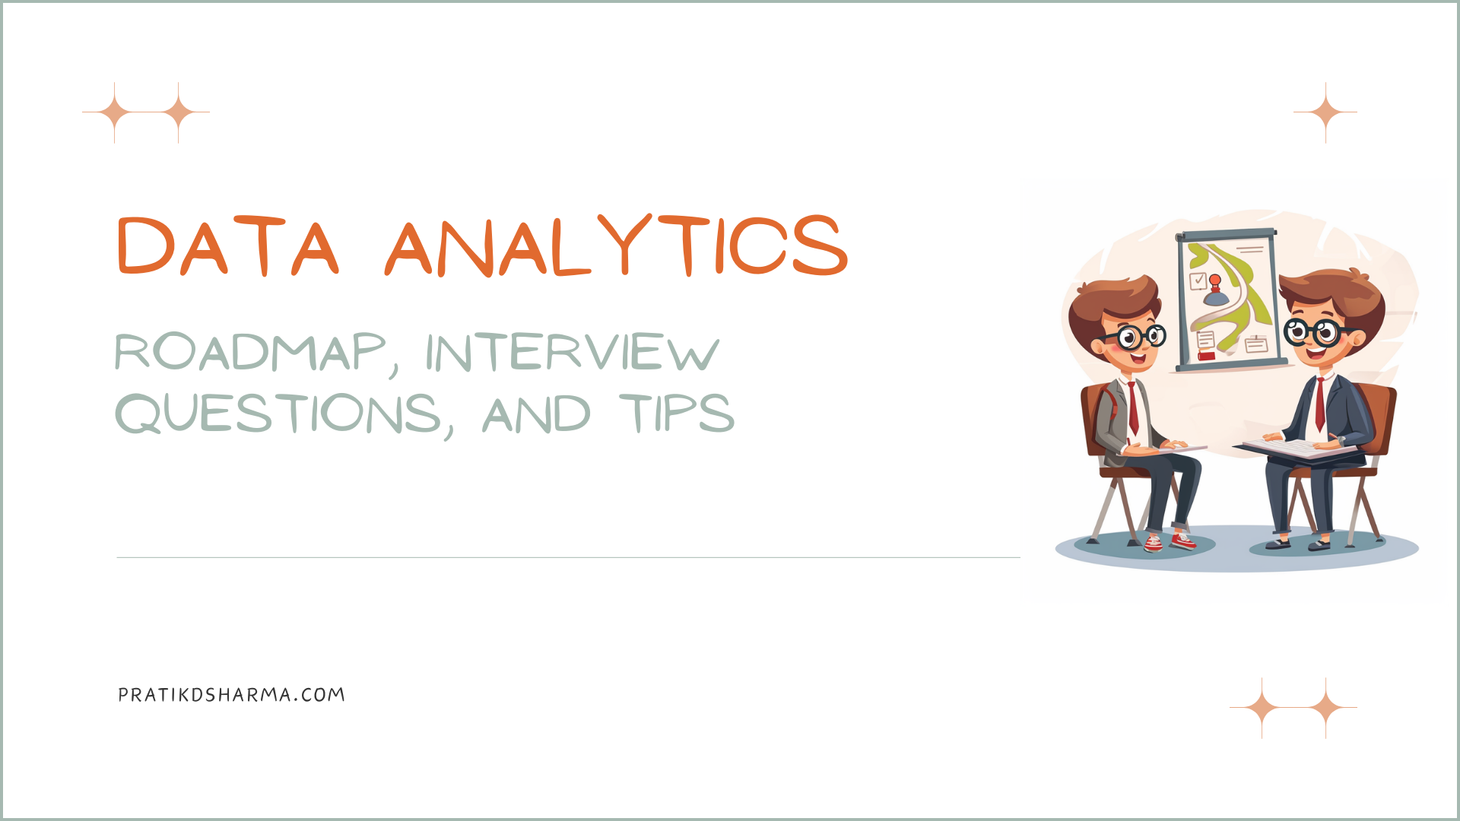 Data Analytics Roadmap, Interview Questions, and Tips.